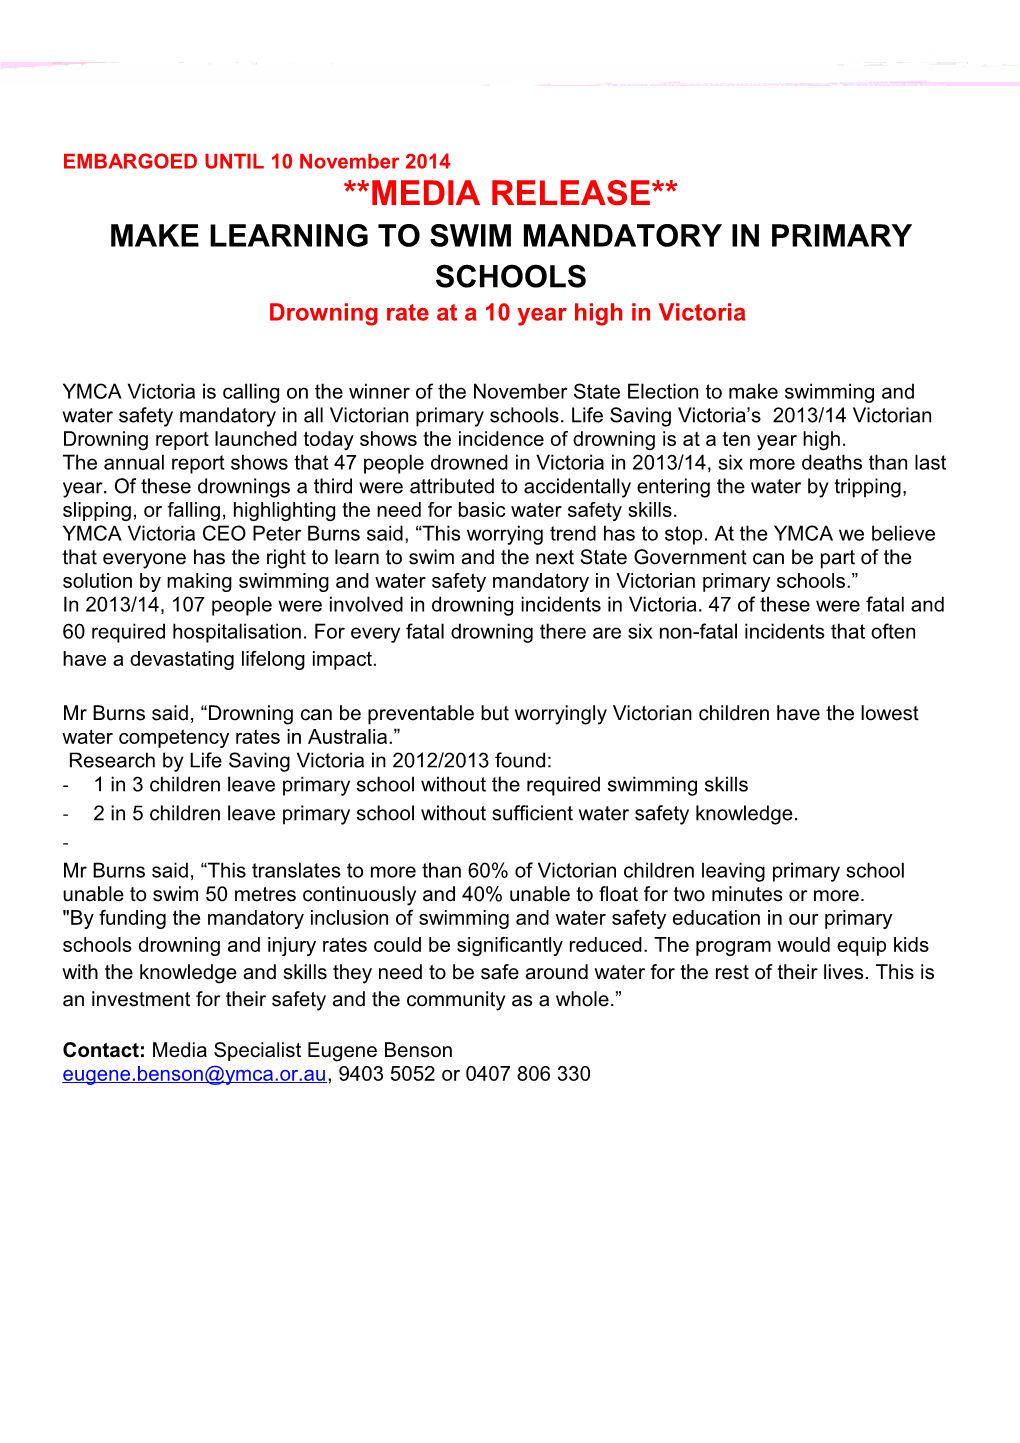 MEDIA RELEASE MAKE LEARNING to SWIM MANDATORY in PRIMARY SCHOOLS Drowning Rate at a 10